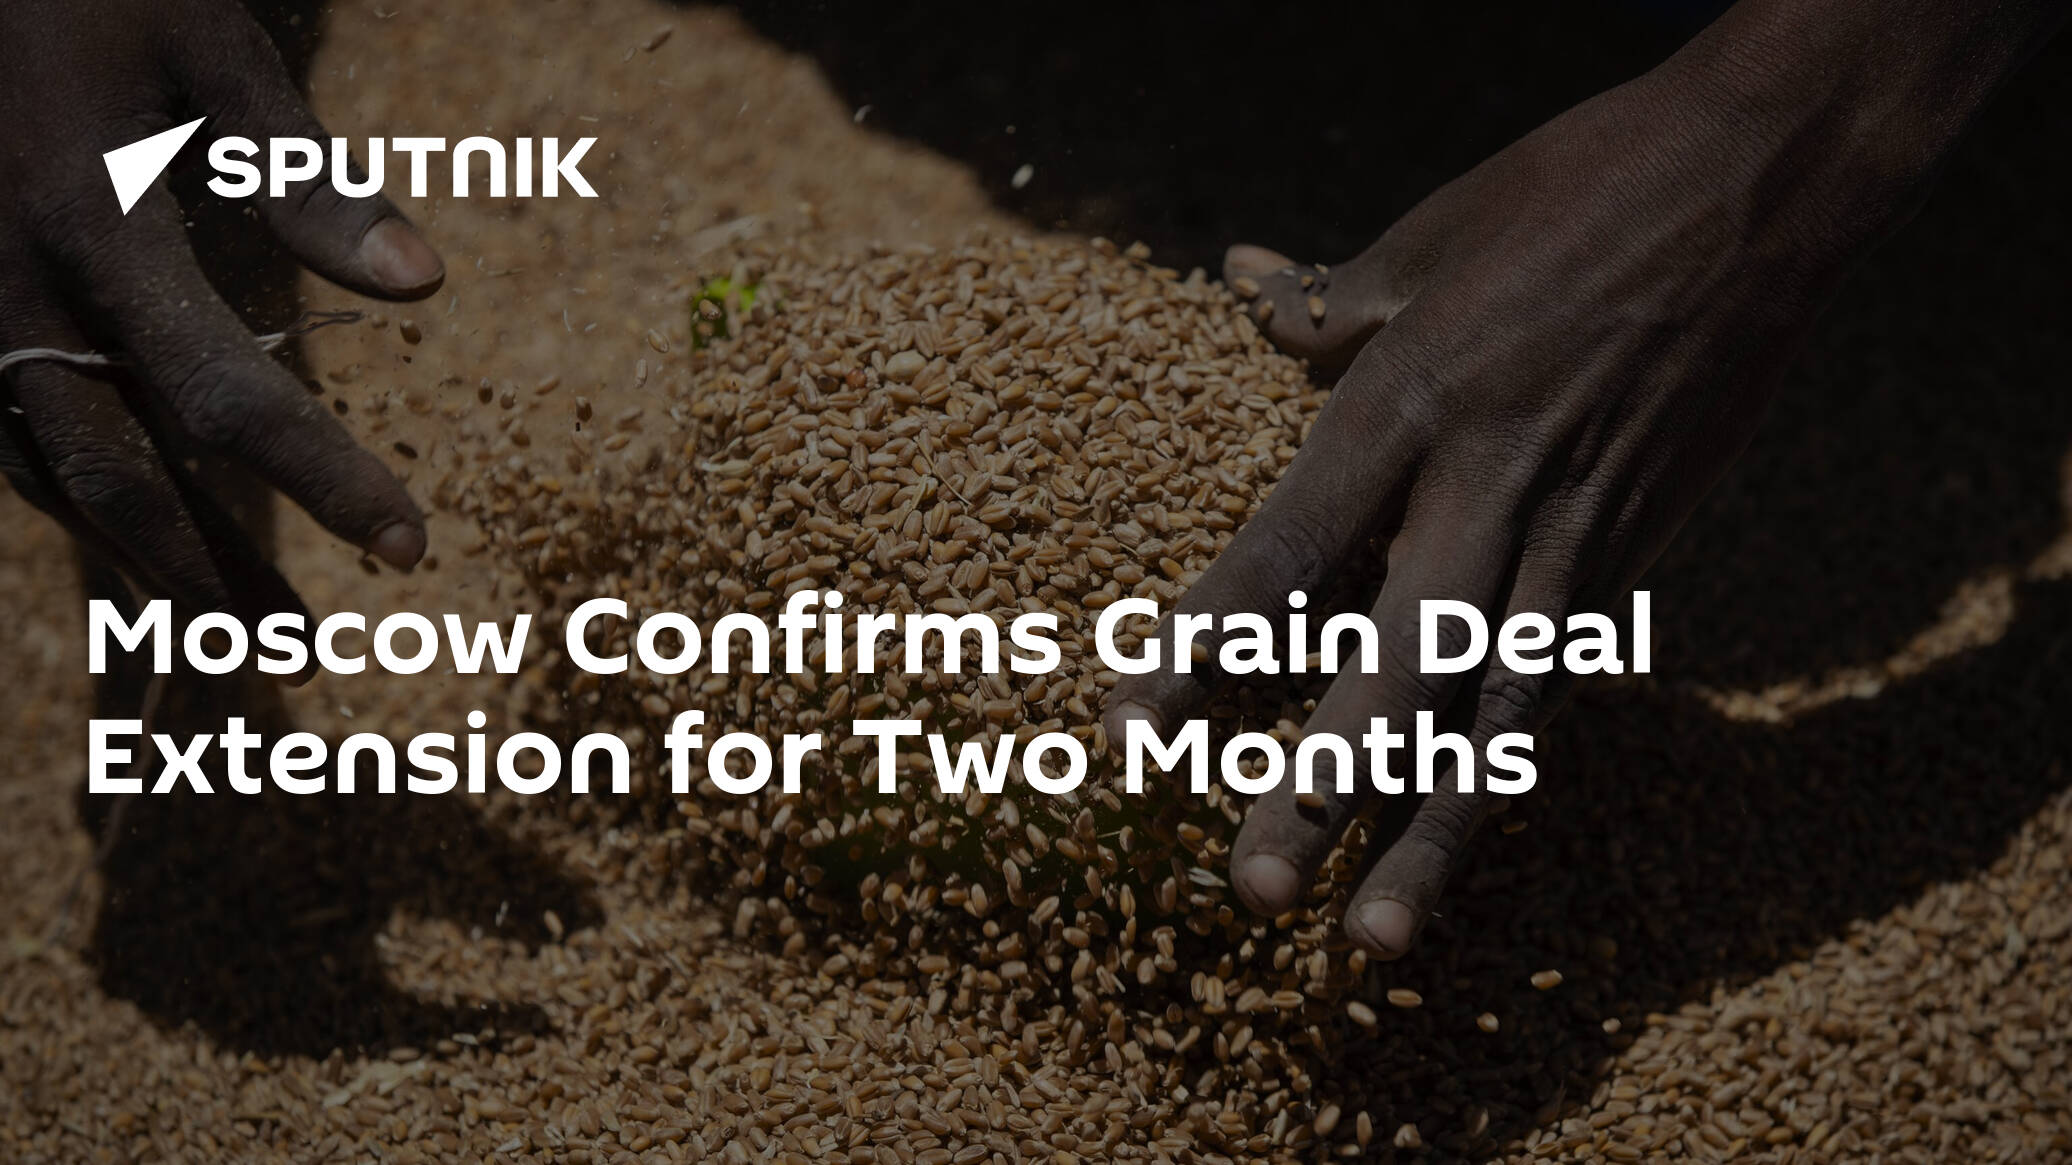 Moscow Confirms Grain Deal Extension for Two Months